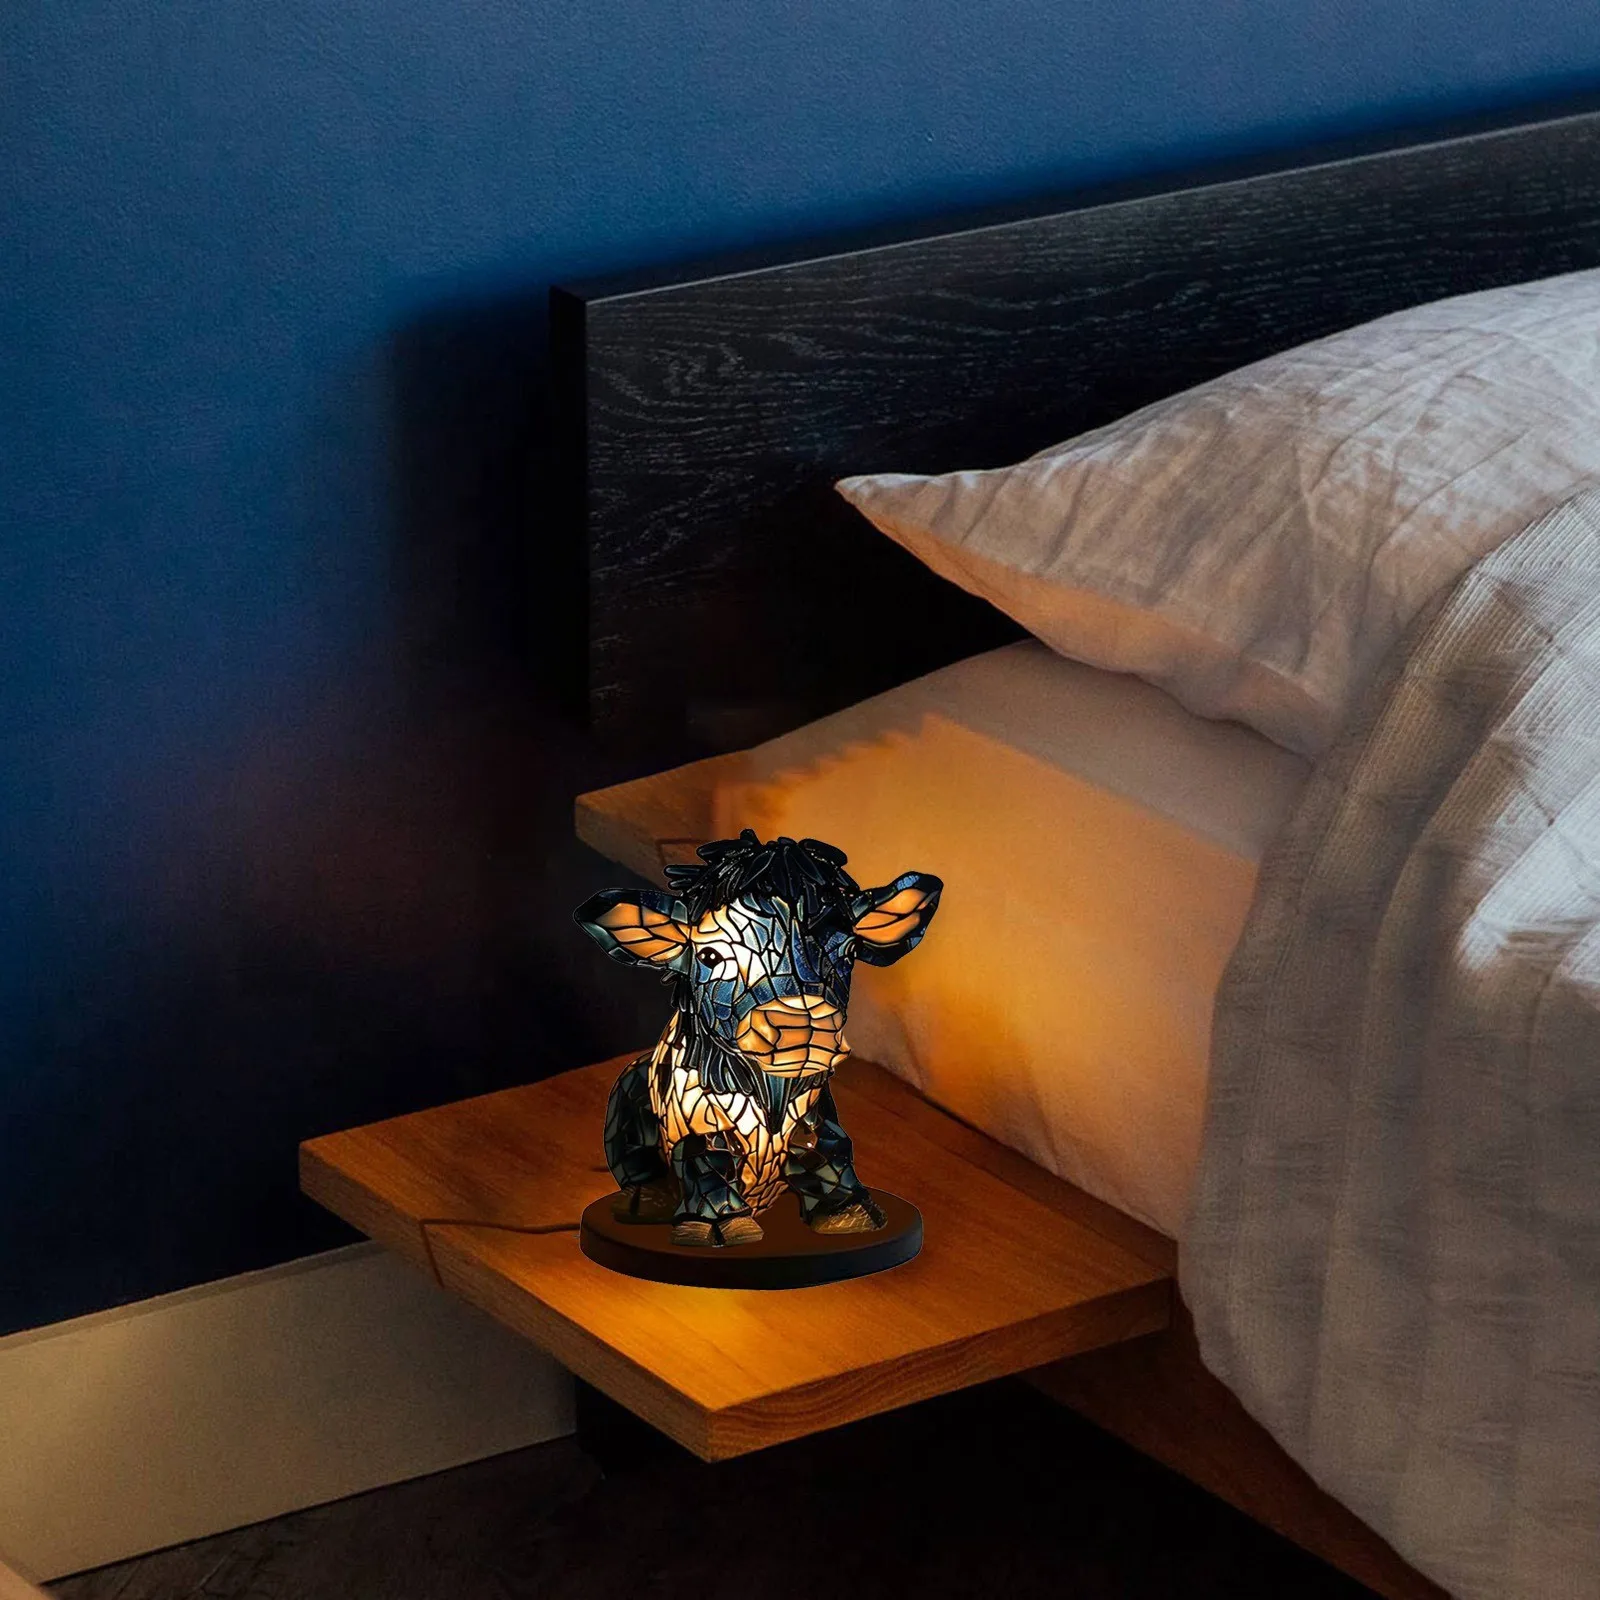 

Cow Bedside Lamp Cow Lamps For Bedrooms Cow Light Nightstand Lamp Table Lamp For Bedroom Western Lamps For Living Room Desk